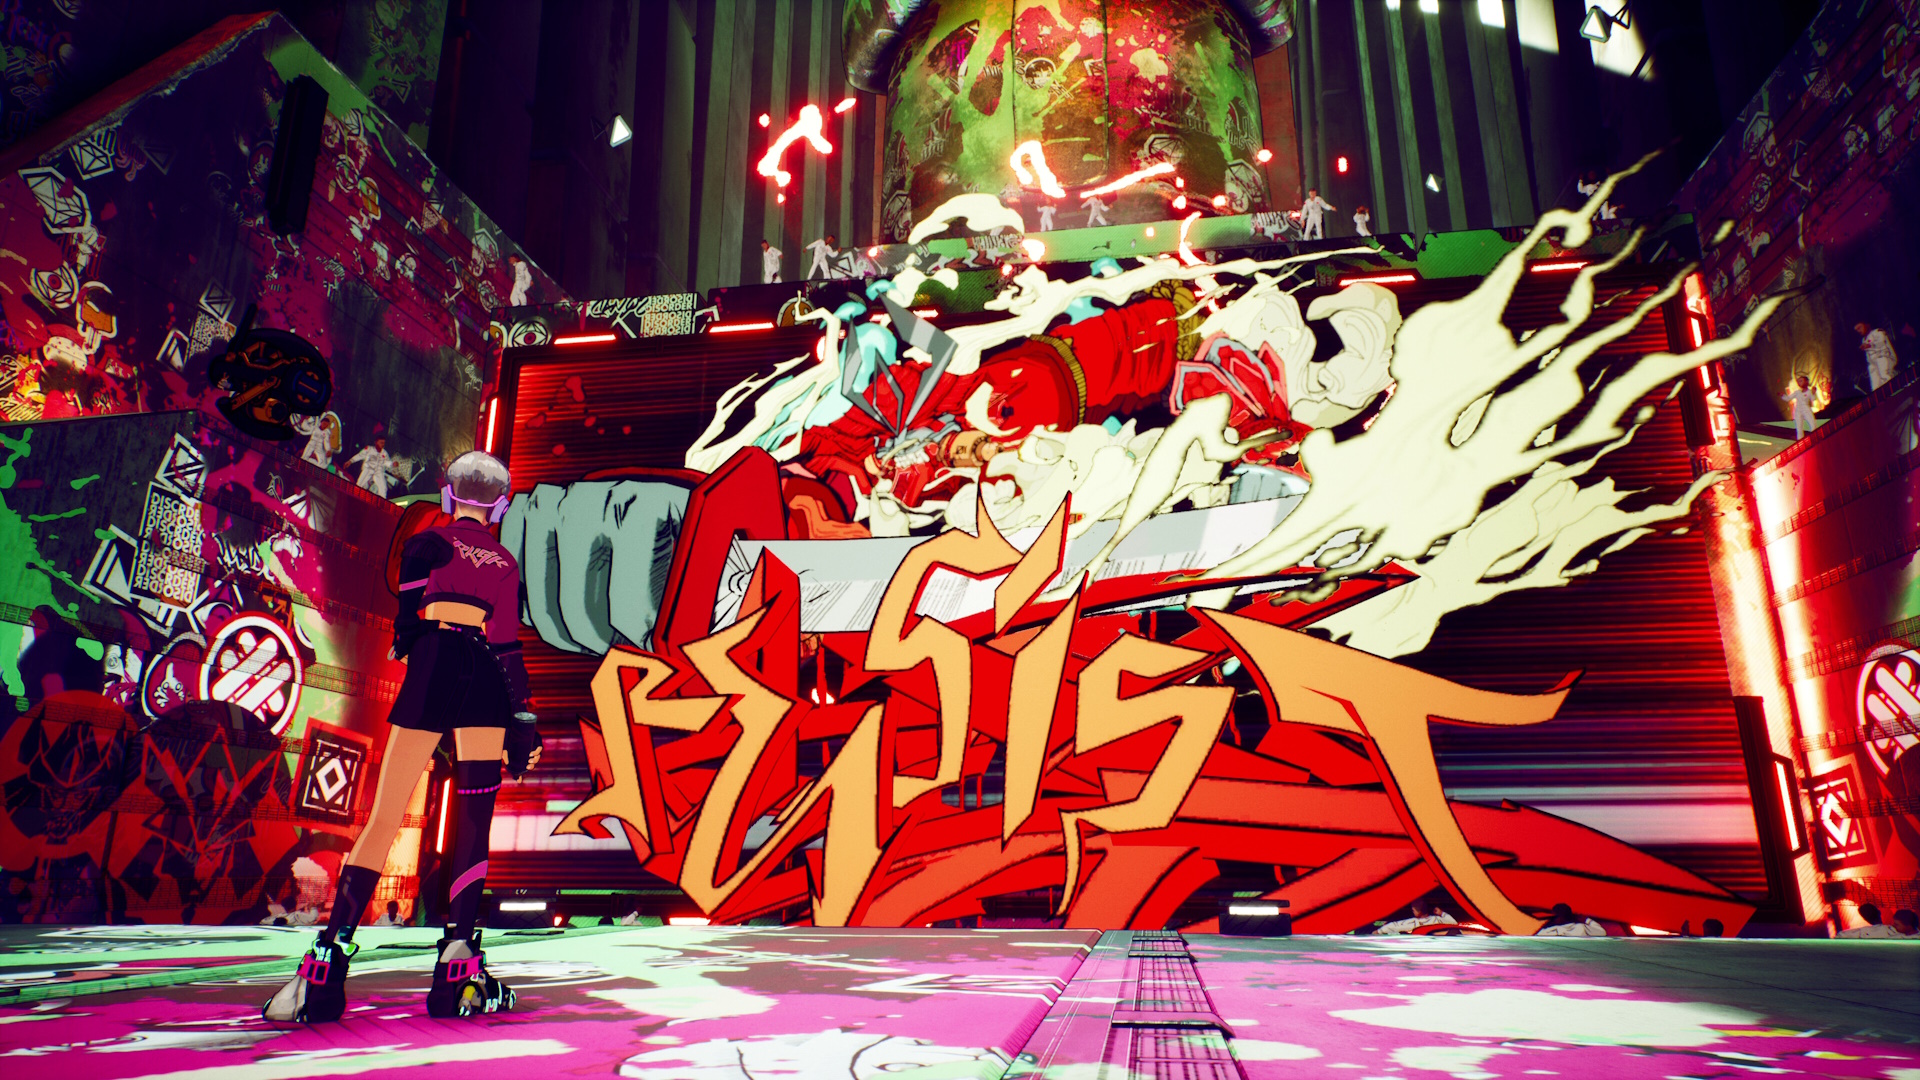 This graffiti-filled, anime-inspired 3D platformer oozes personality with its mix of Japanese pop culture inspirations